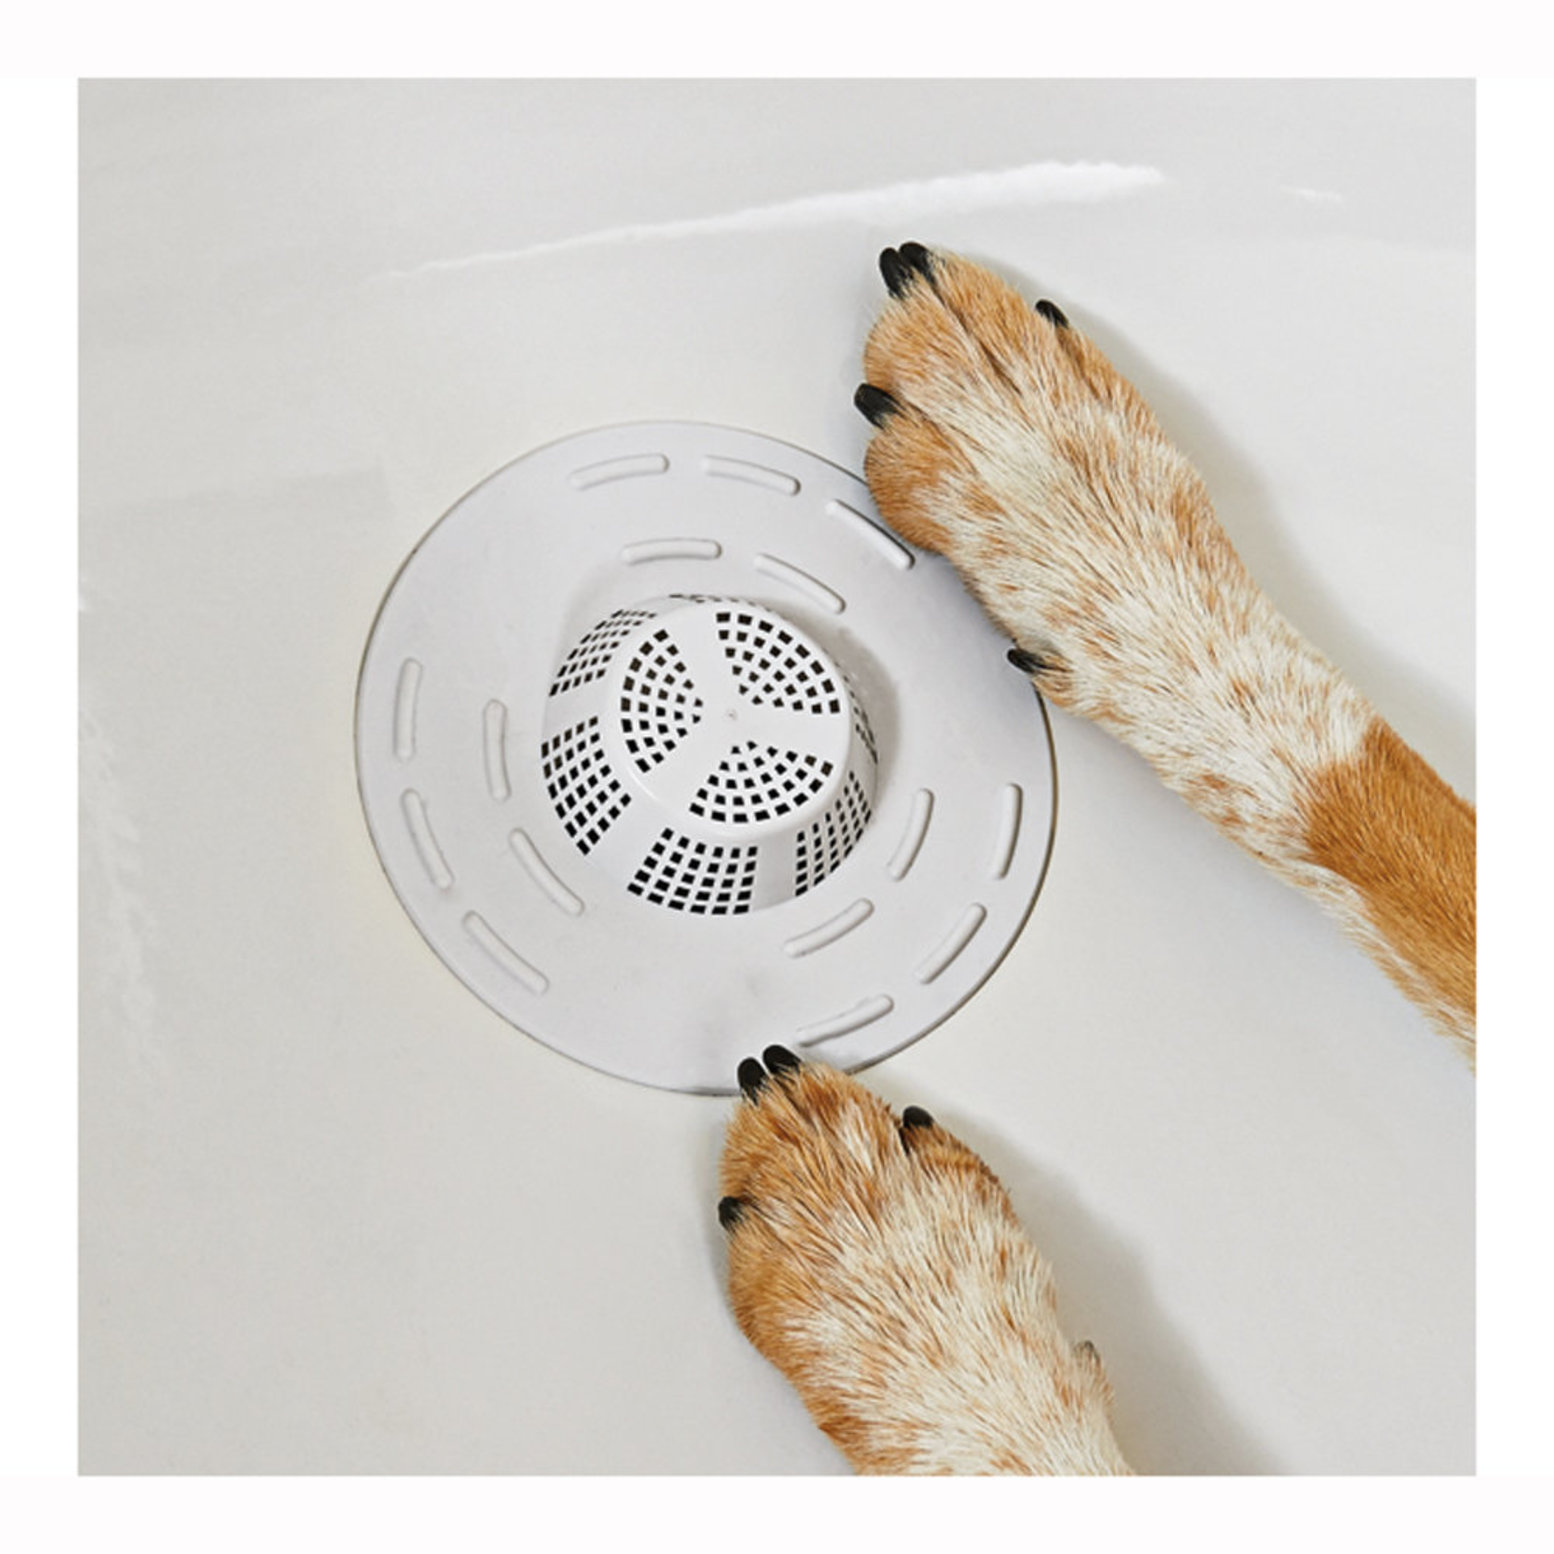 https://cdn.renspets.com/product_images/rinse-ace-pet-hair-catcher/5bc35e10b911a76c0bb00c6d/pdp_zoom.jpg?c=1539530256